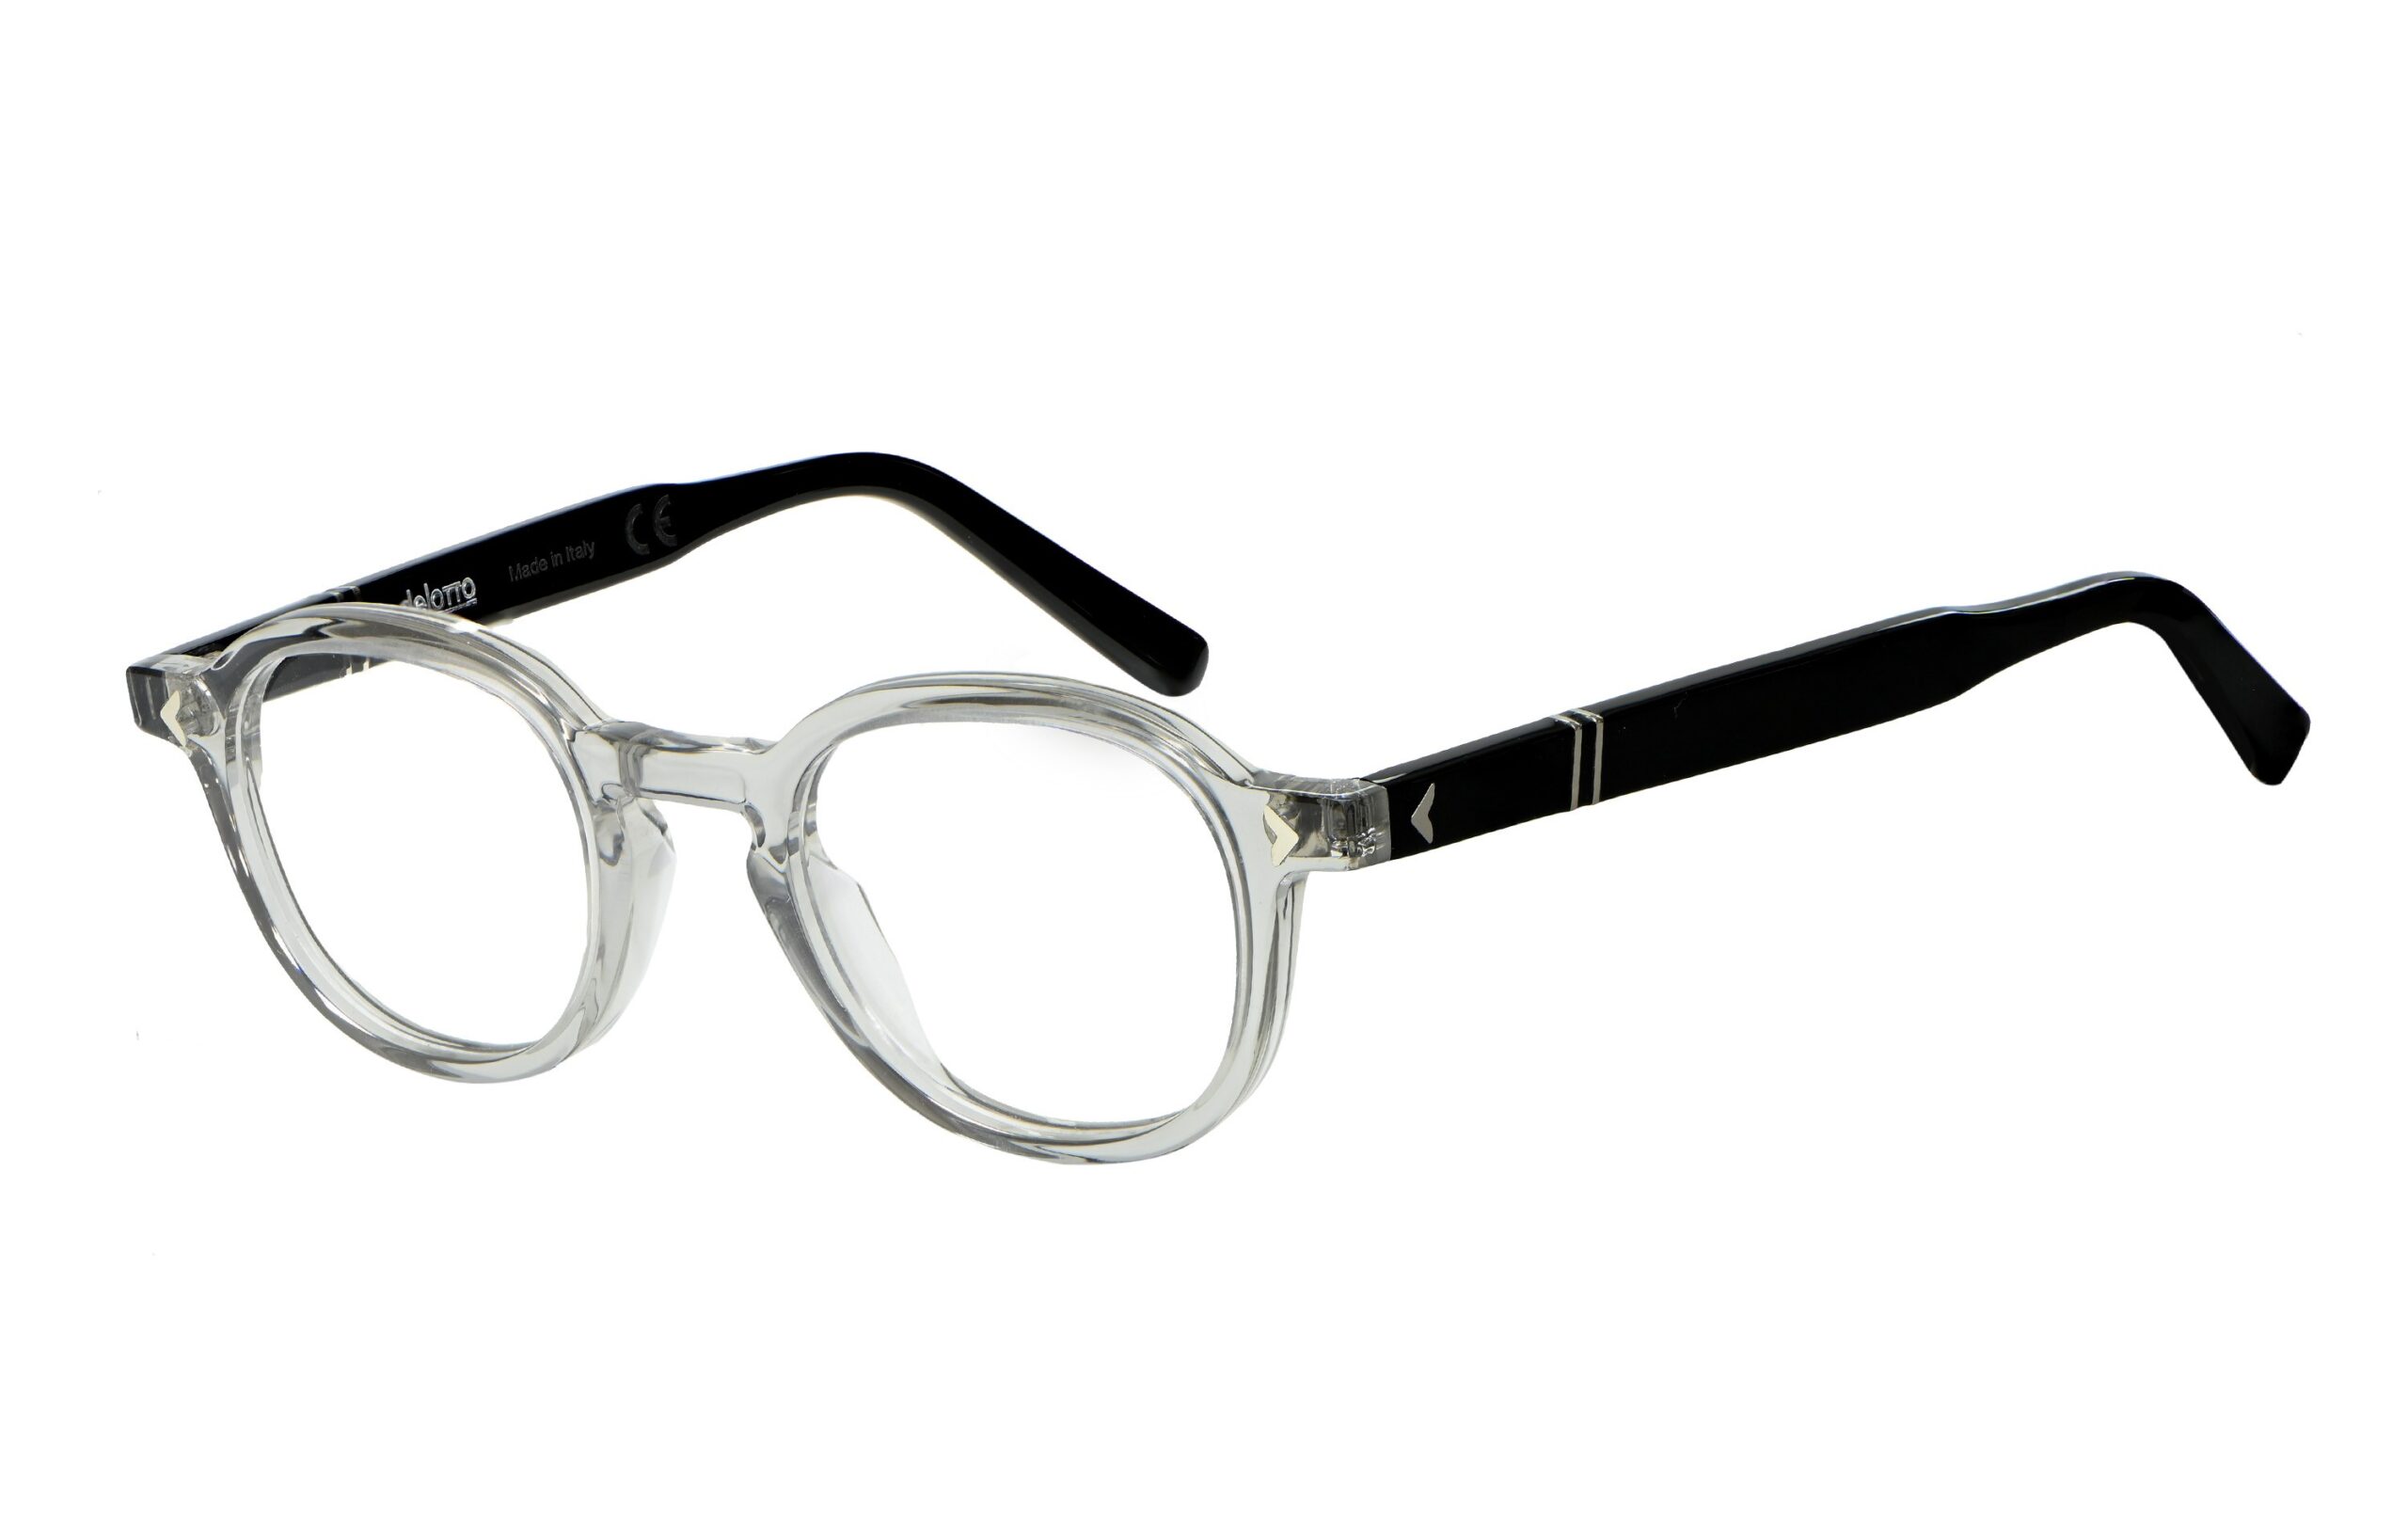 DL99 c.8016 – Translucent grey front with black temples